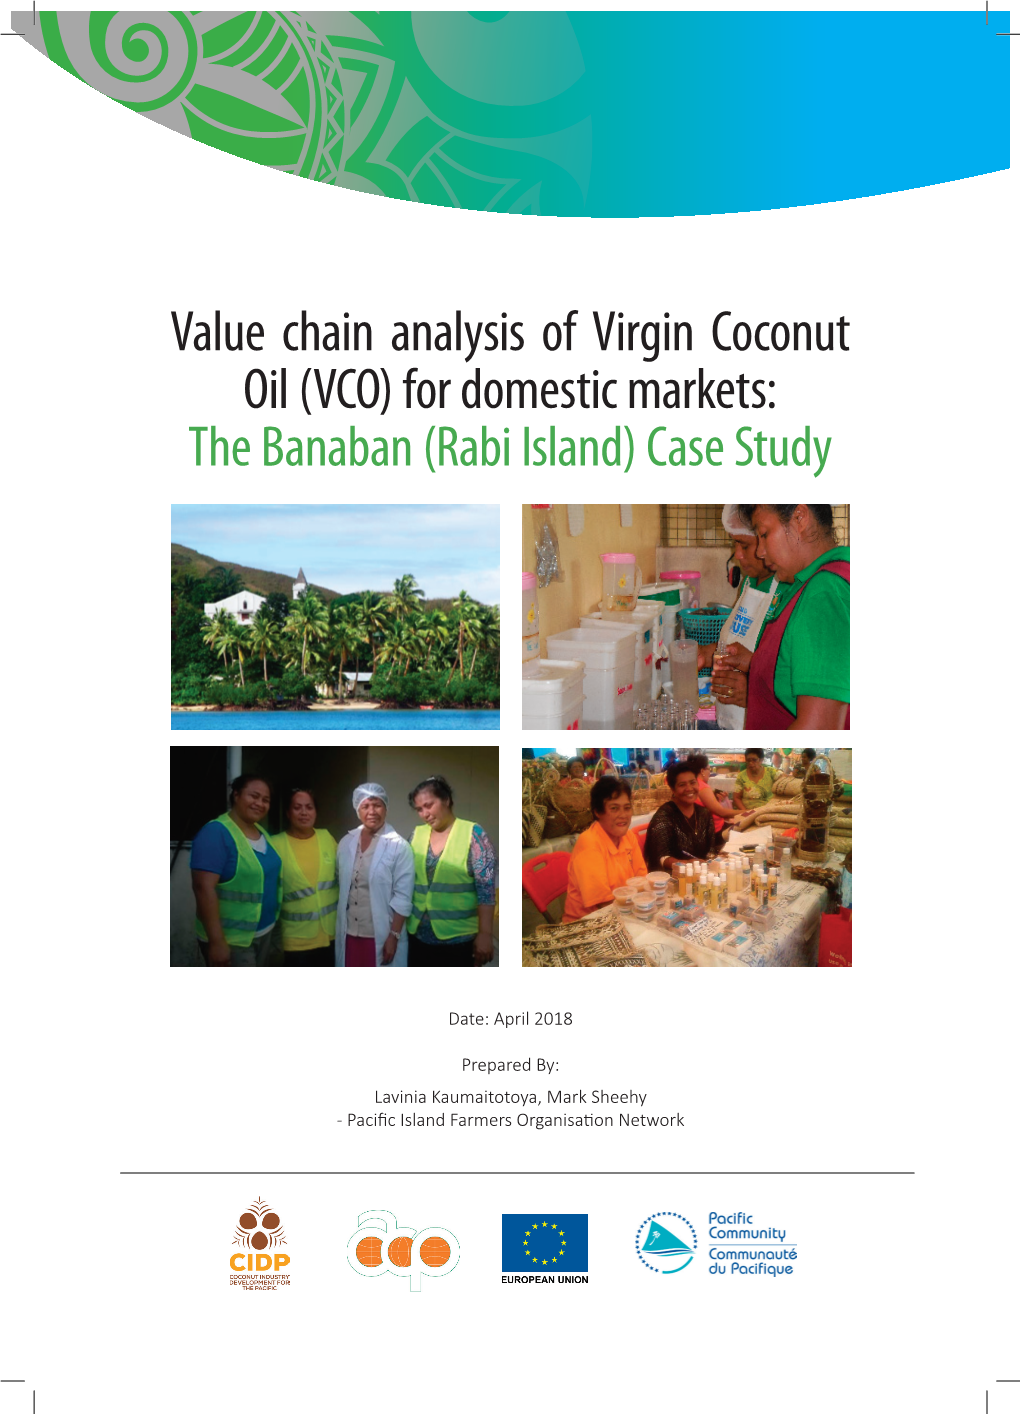 Value Chain Analysis of Virgin Coconut Oil (VCO) for Domestic Markets: the Banaban (Rabi Island) Case Study